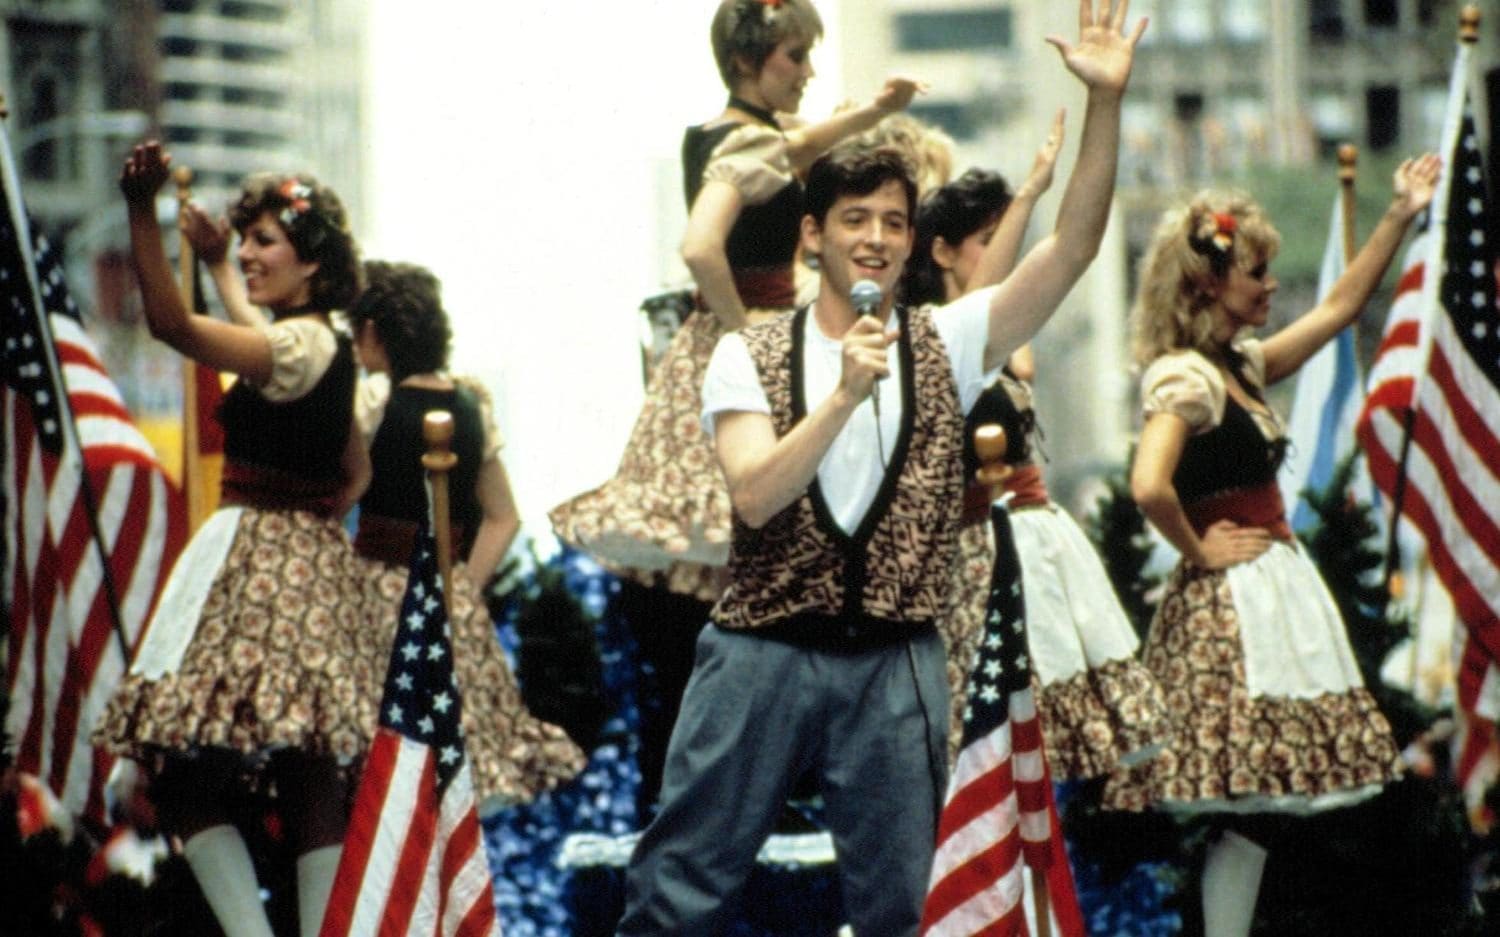 Things you didn’t know about Ferris Bueller’s Day Off